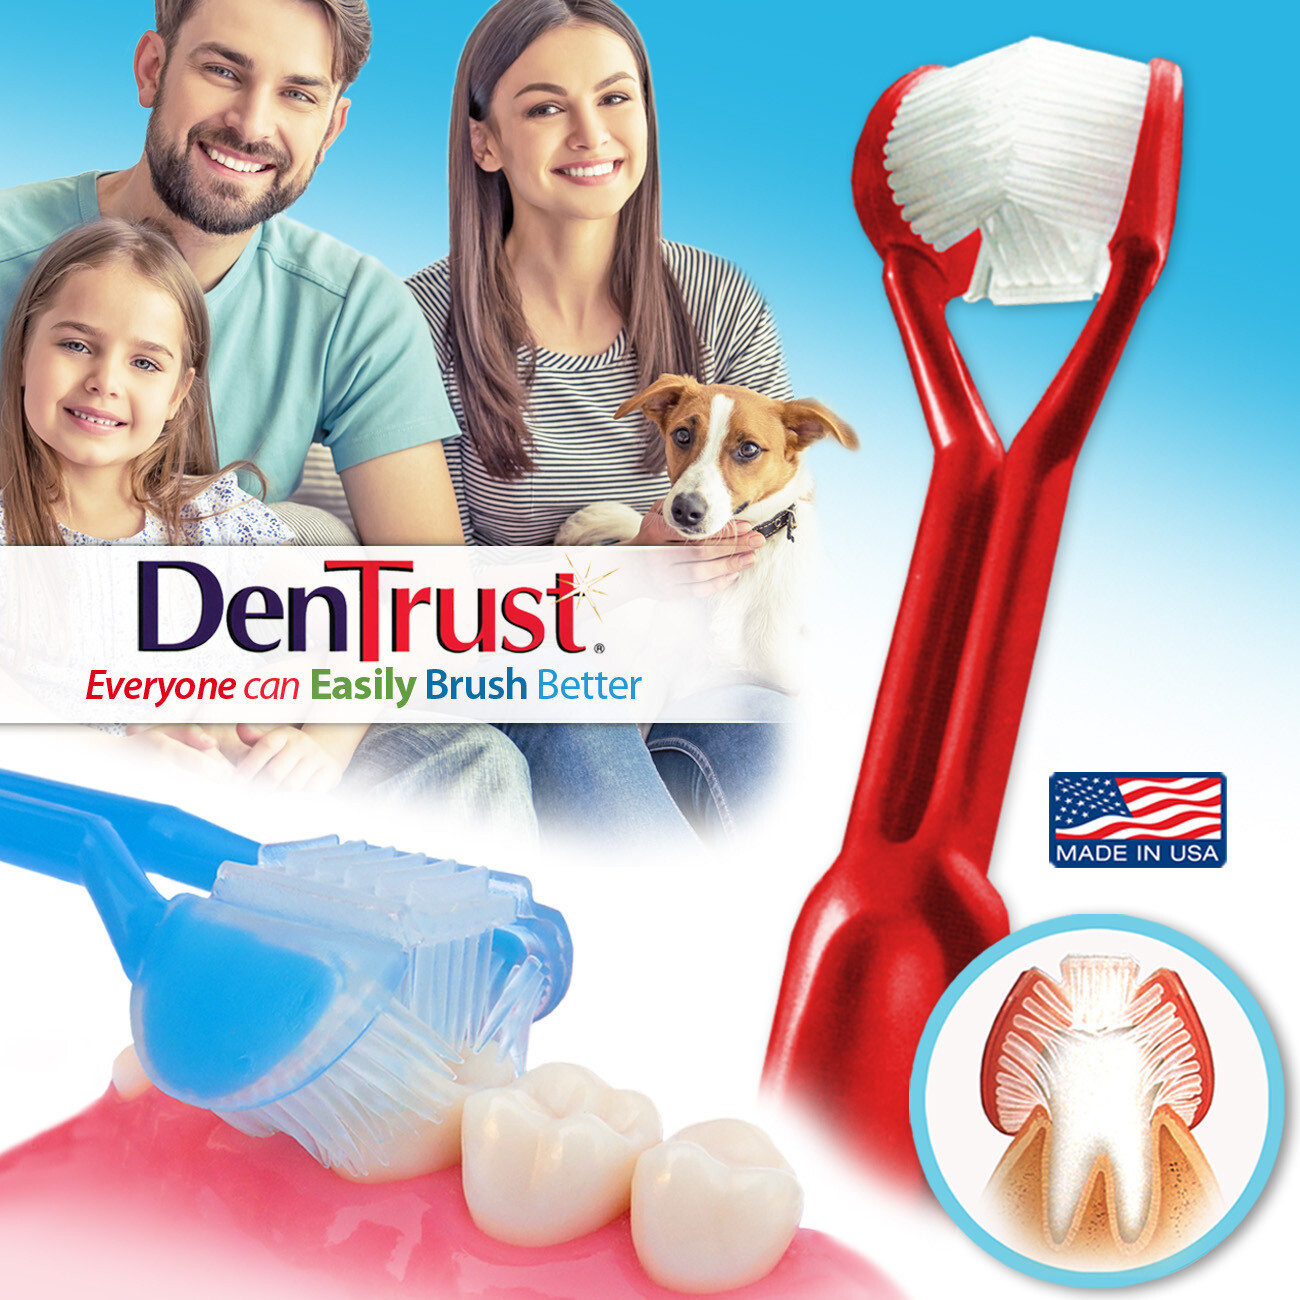 DenTrust: The Only Child-Safe 3-SIDED Toothbrush | Made in USA | Clinically Proven to Prevent Gum Disease & Gingivitis | Complete Clean + Tongue Scraper | Triple Whitening Soft Brush Head Fresh Breath